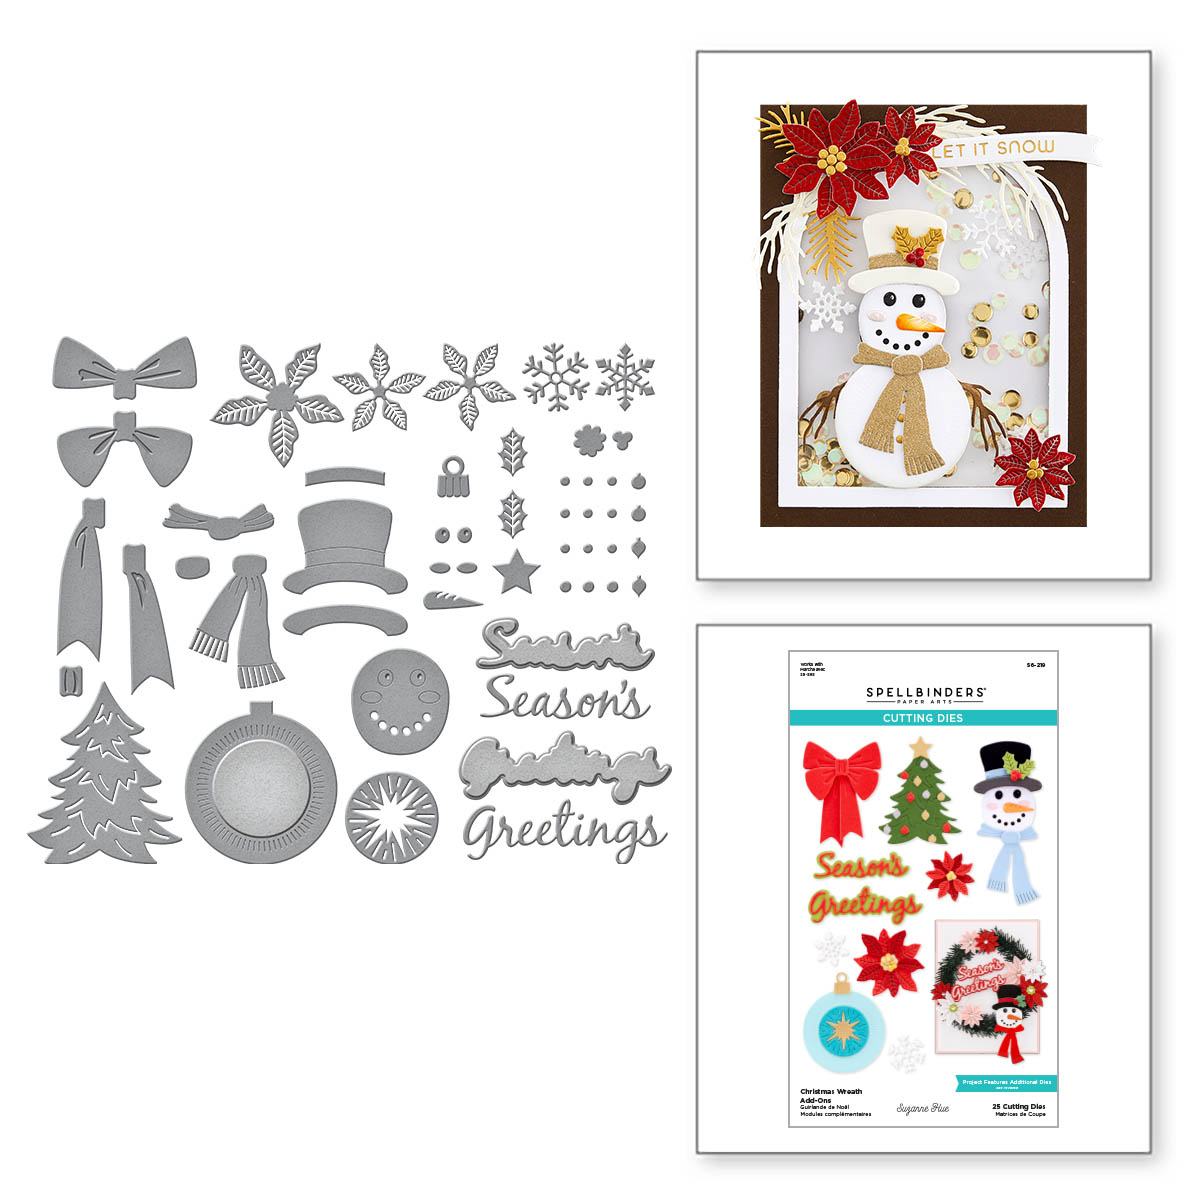 Spellbinderschristmas Wreath Add-ons Etched Dies From the Beautiful Wreaths Collection